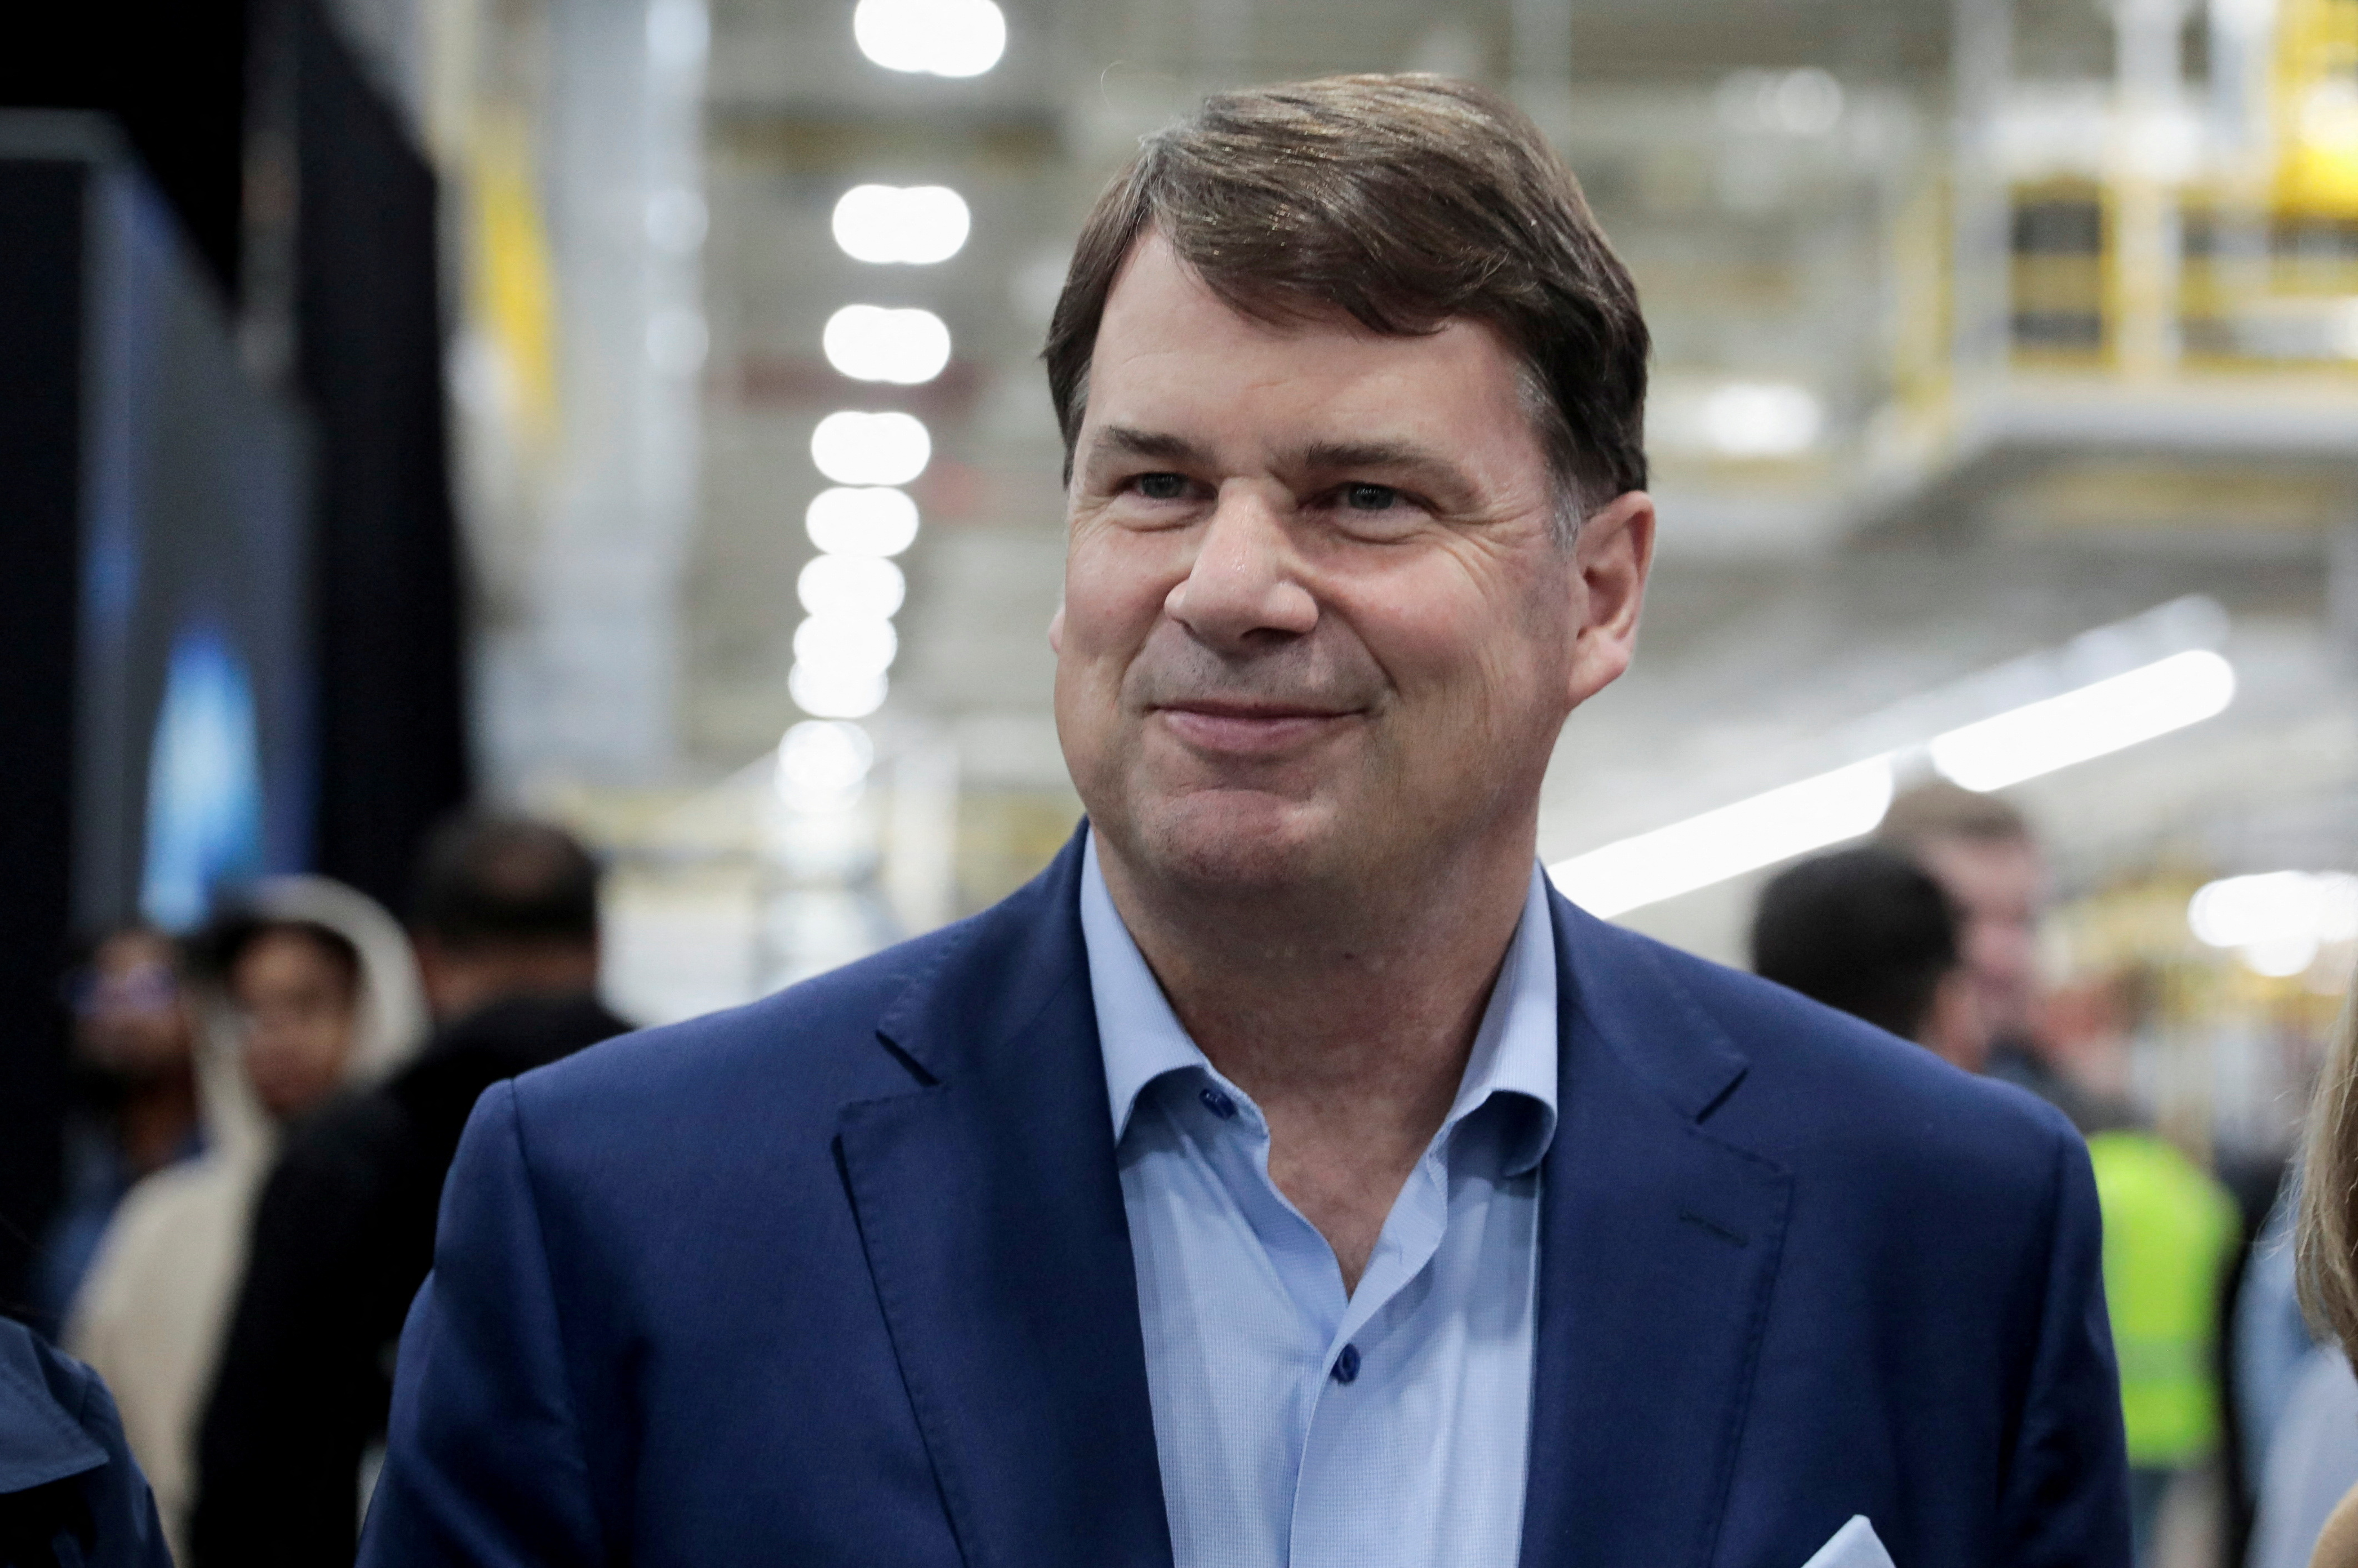 Ford CEO Jim Farley attends the official launch of the all-new Ford F-150 Lightning electric pickup truck in Dearborn